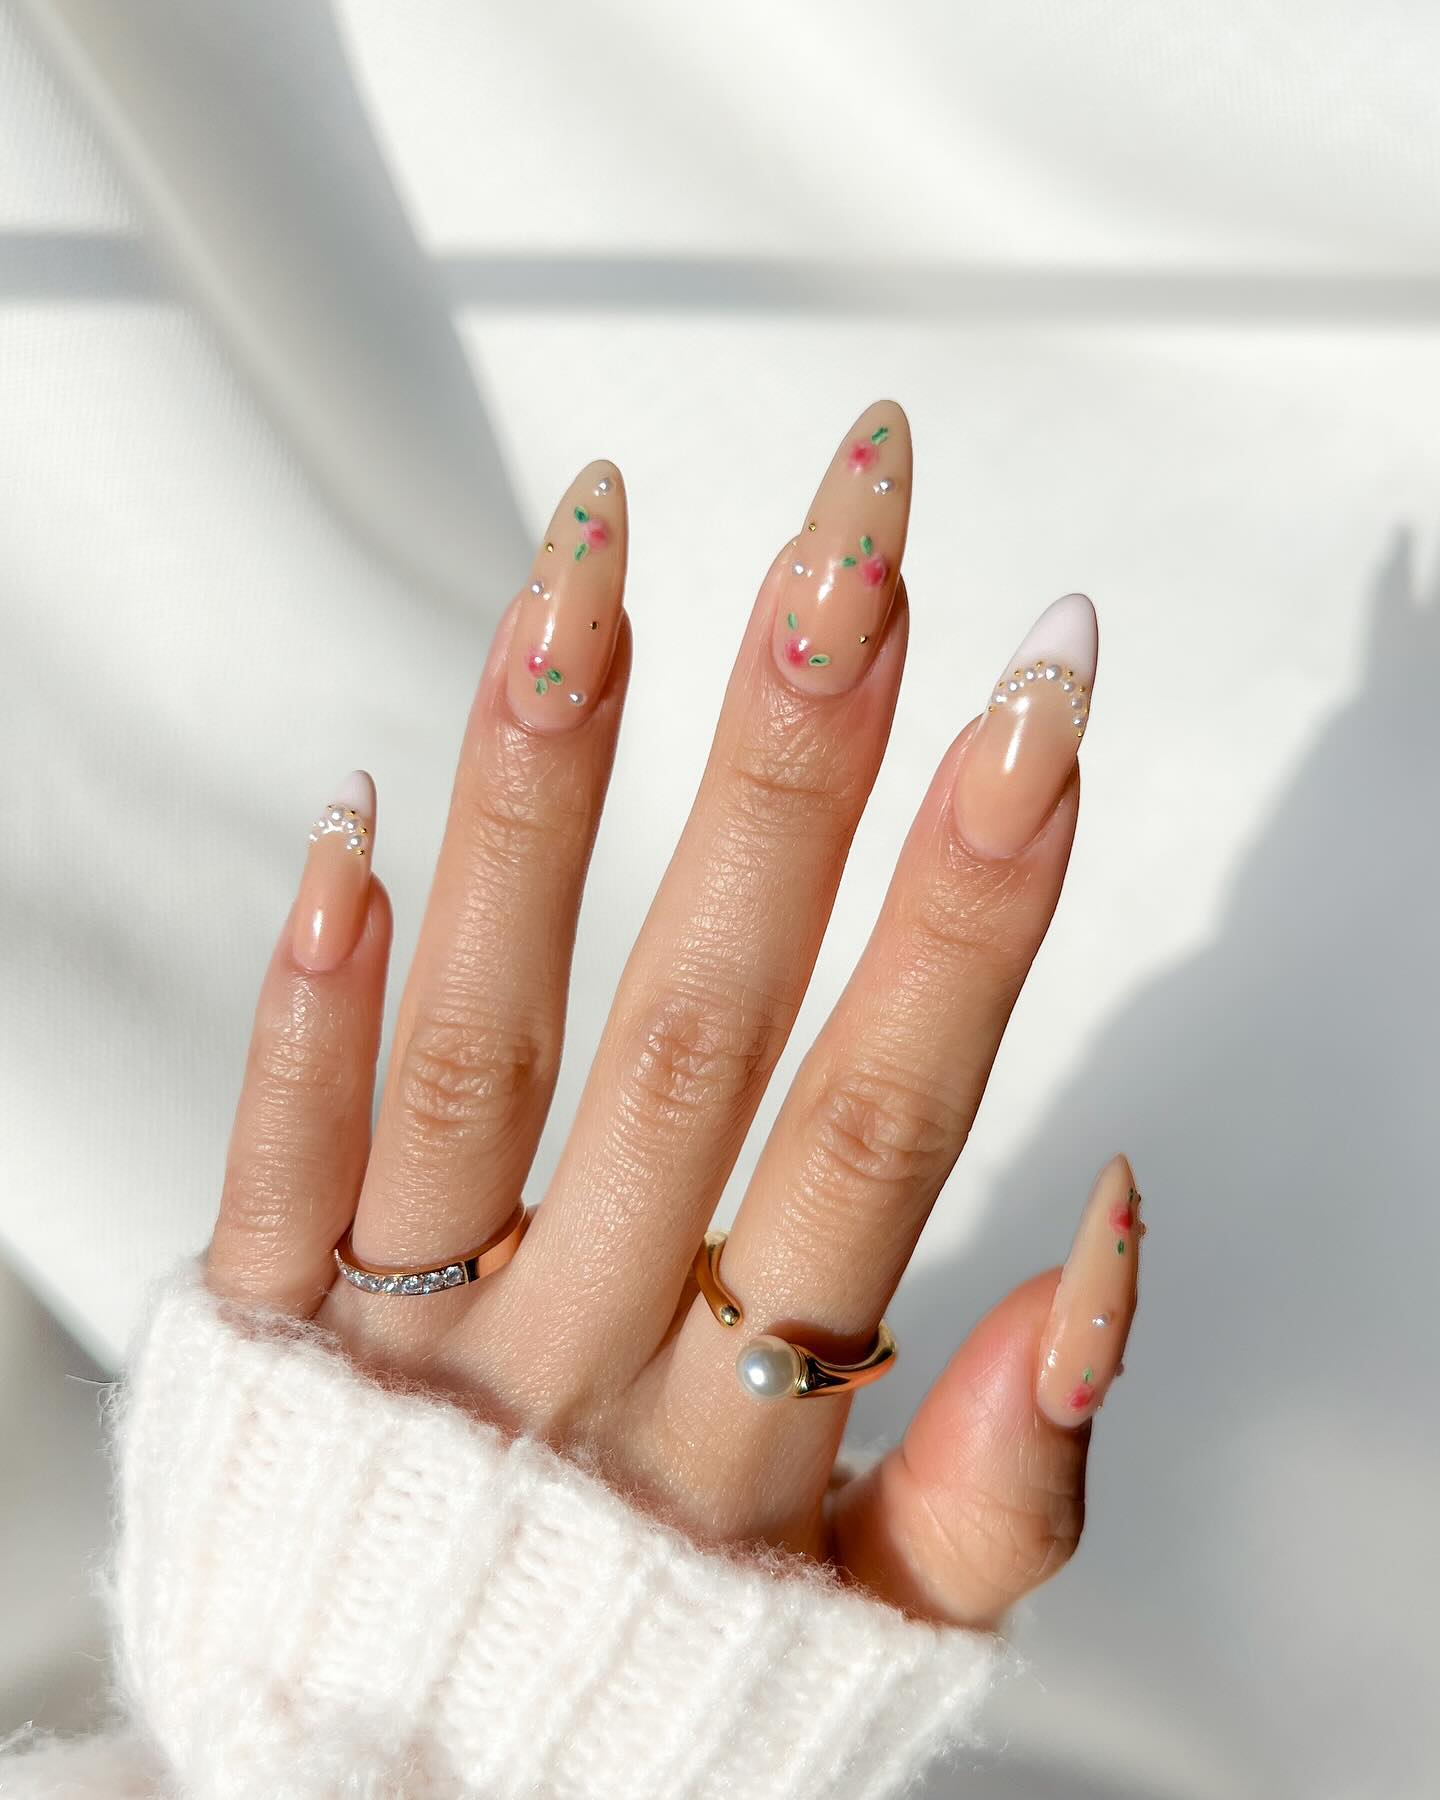 100 Pretty Spring Nail Designs To Try This Year images 83